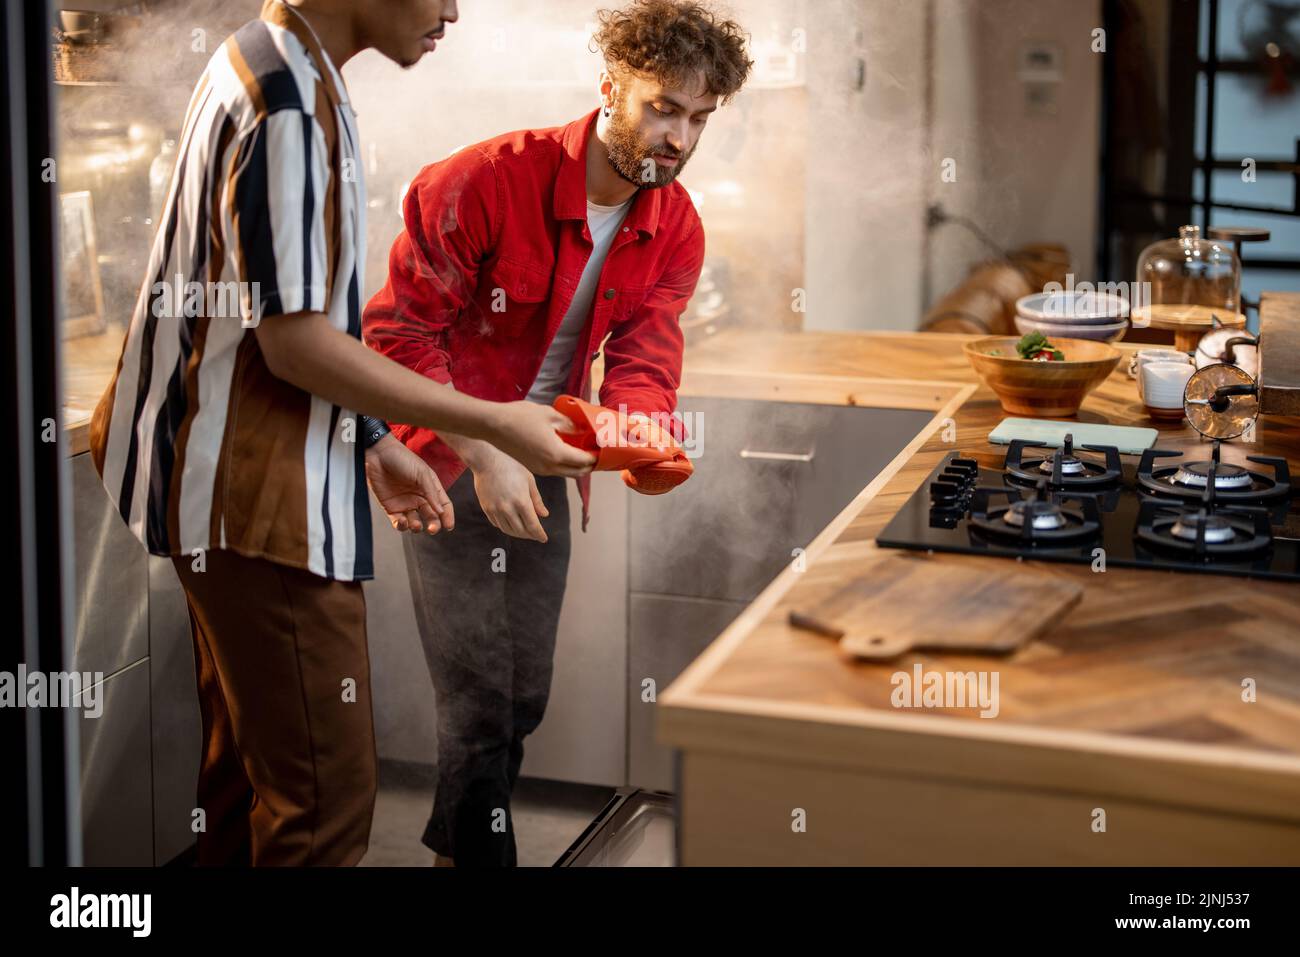 Two guys open the oven while cooking delicious food on kitchen. Steam coming out of the oven. Concept of two gay couple cooking at home Stock Photo